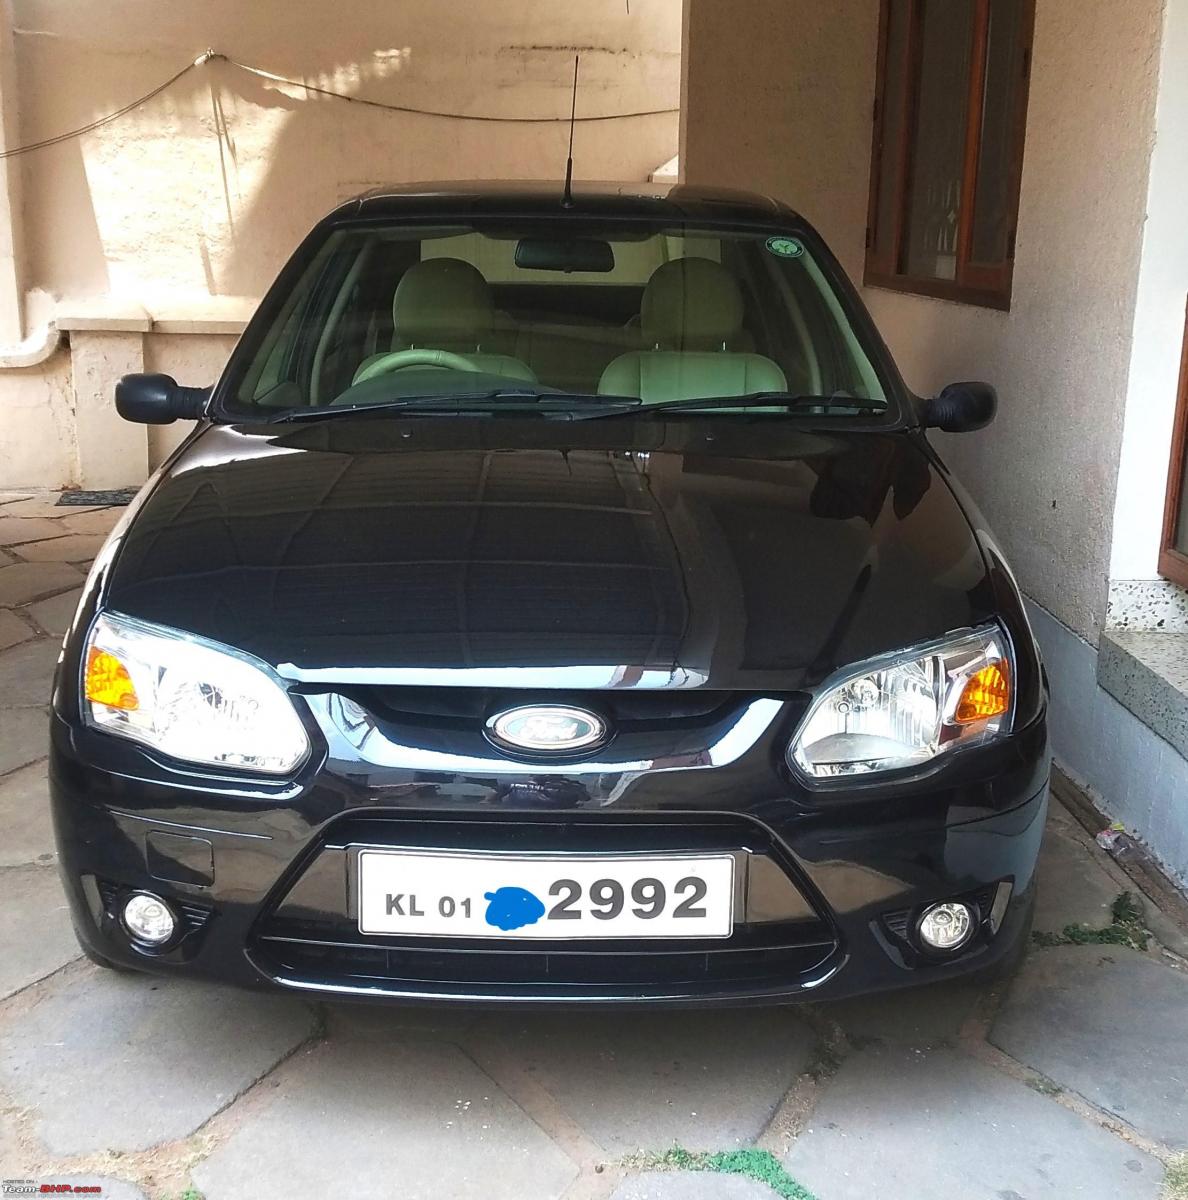 Bought a 15-year-old Ford Ikon with 1.9l km on the odo: Here's why, Indian, Ford, Member Content, Ford Ikon, Car purchase